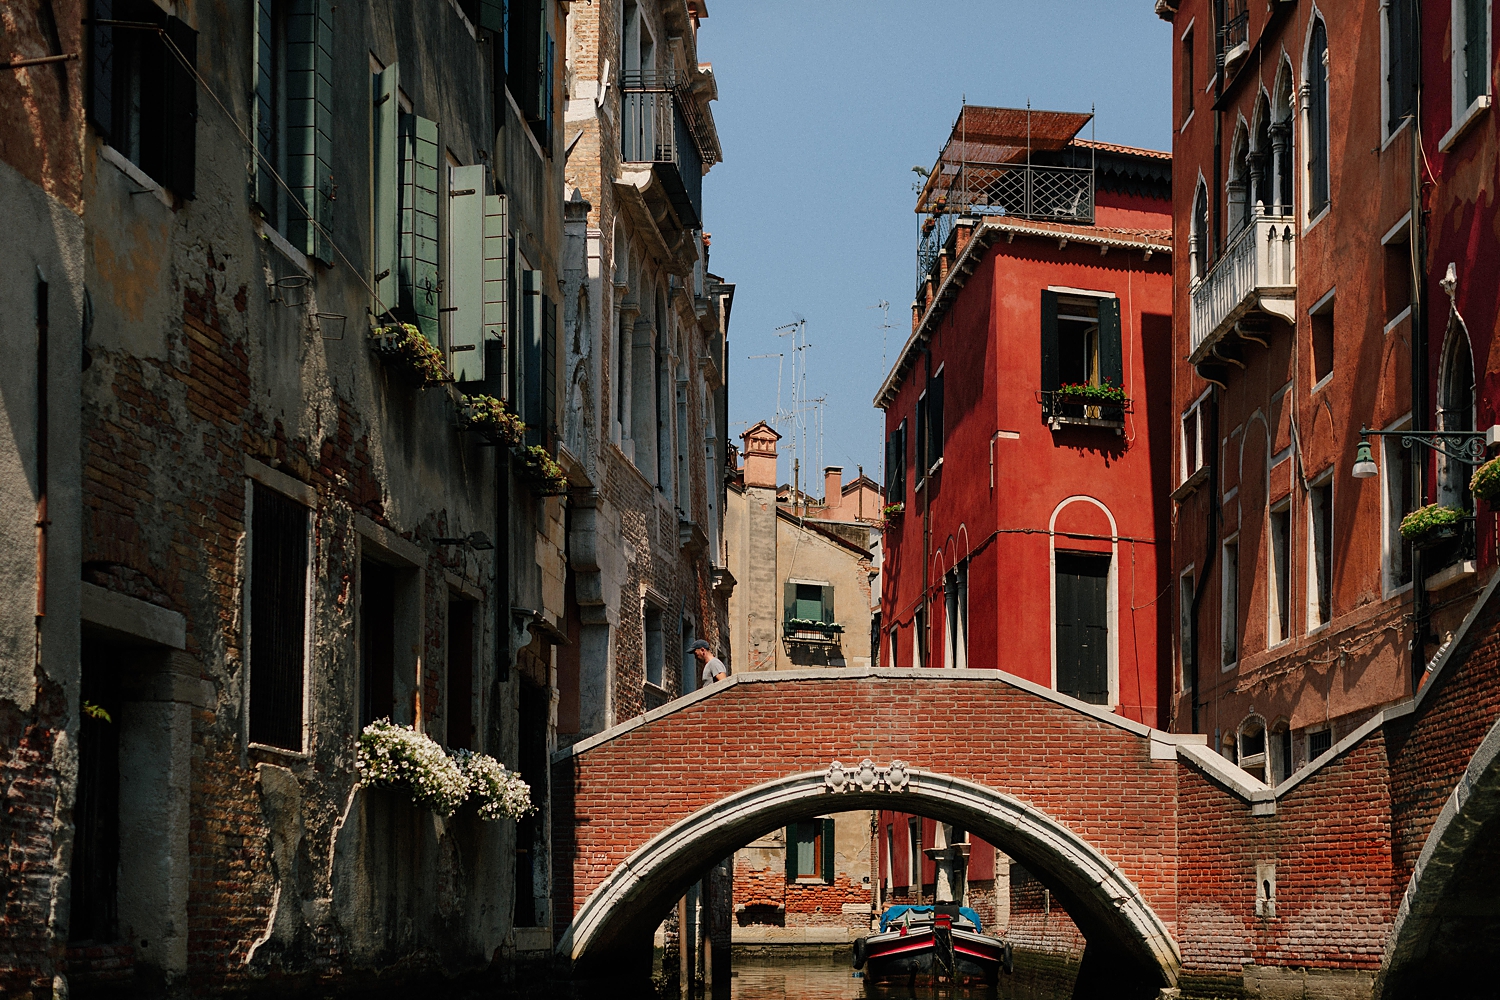 Venice Canal scene with red building and brick bridge under a blue sky